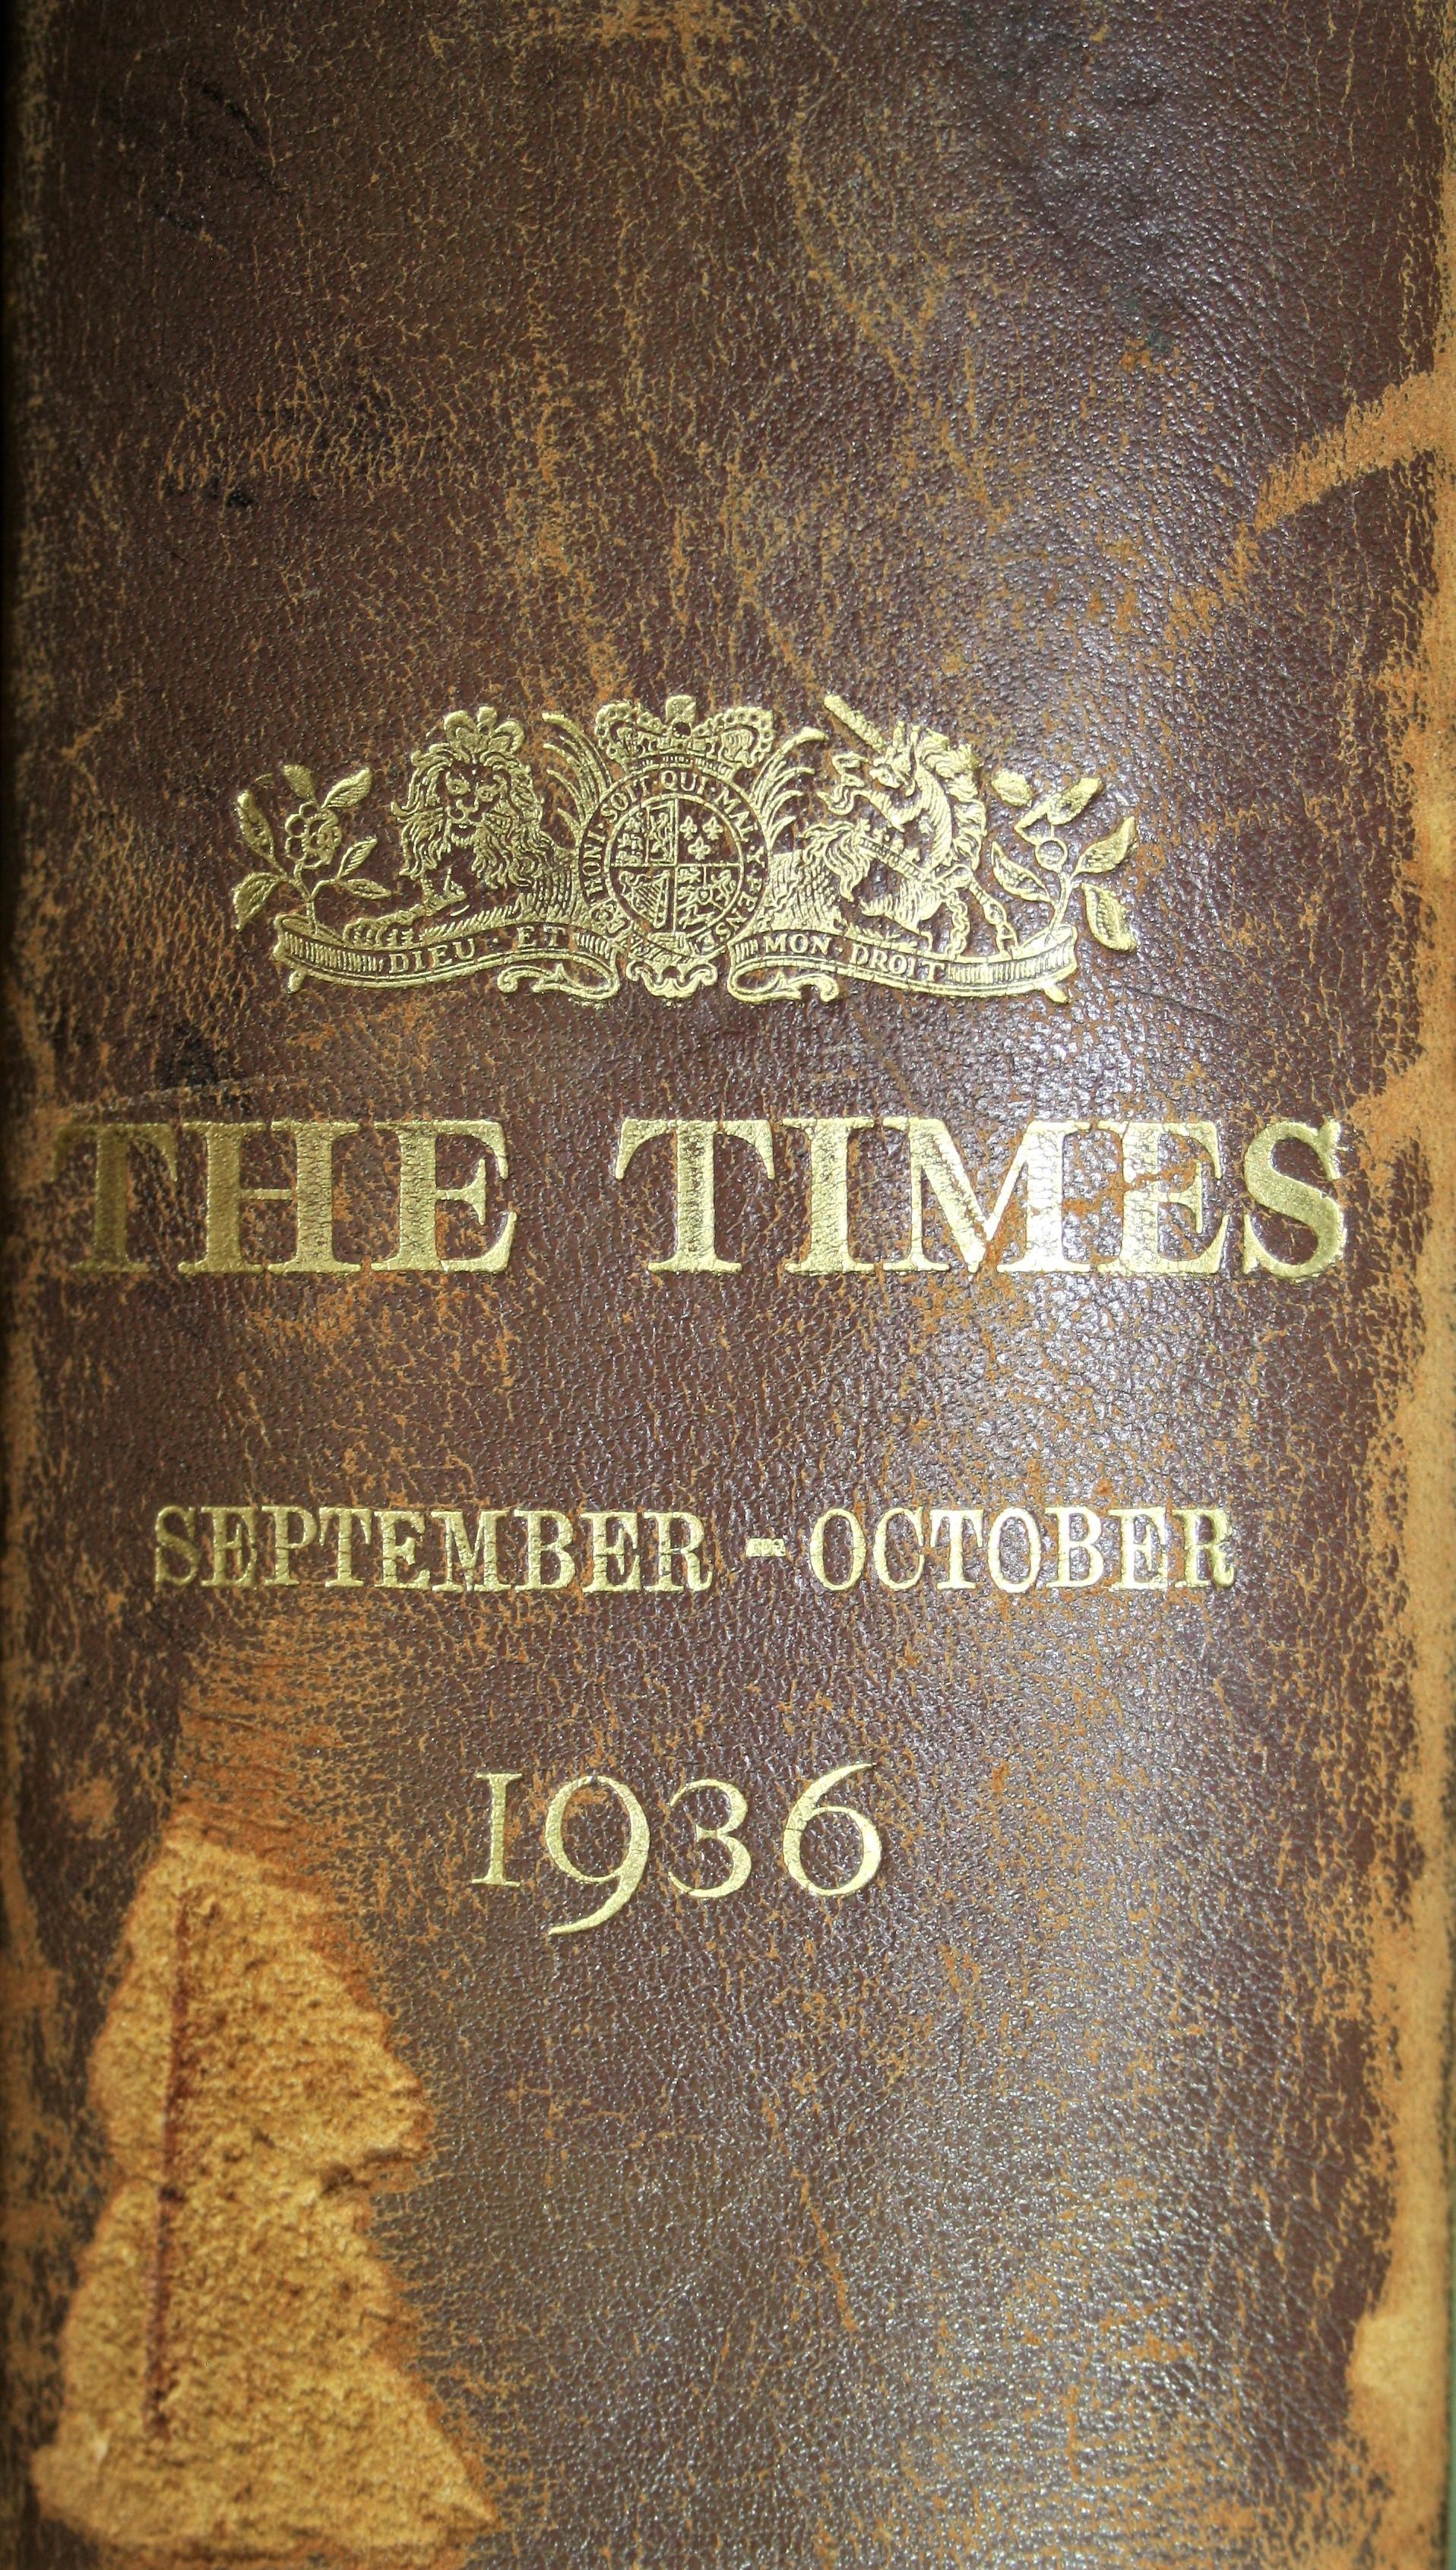 Leather Bound Royal Edition of The Times Newspaper 1936 in Superb Condition For Sale 7